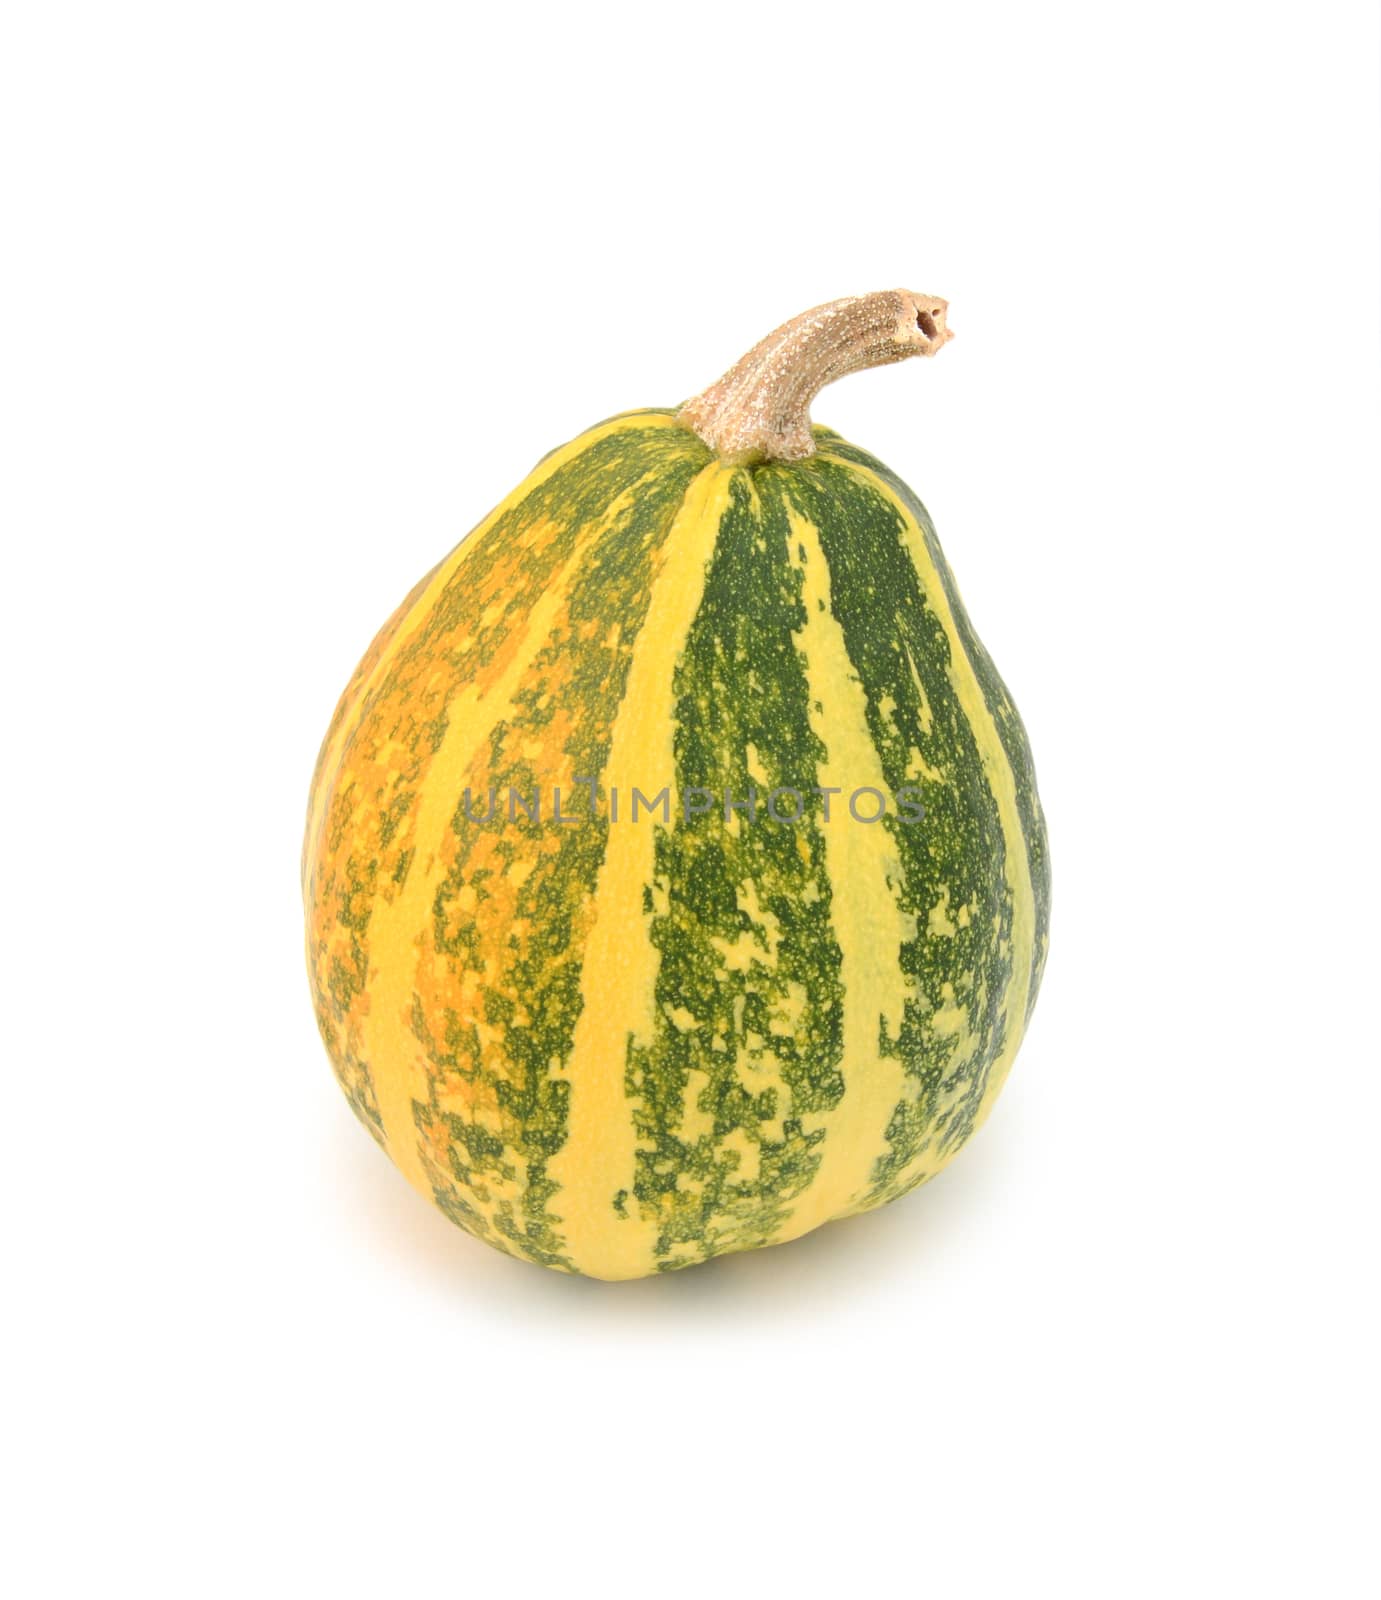 Half-ripe ornamental gourd with yellow and green stripes, changing to orange, on a white background